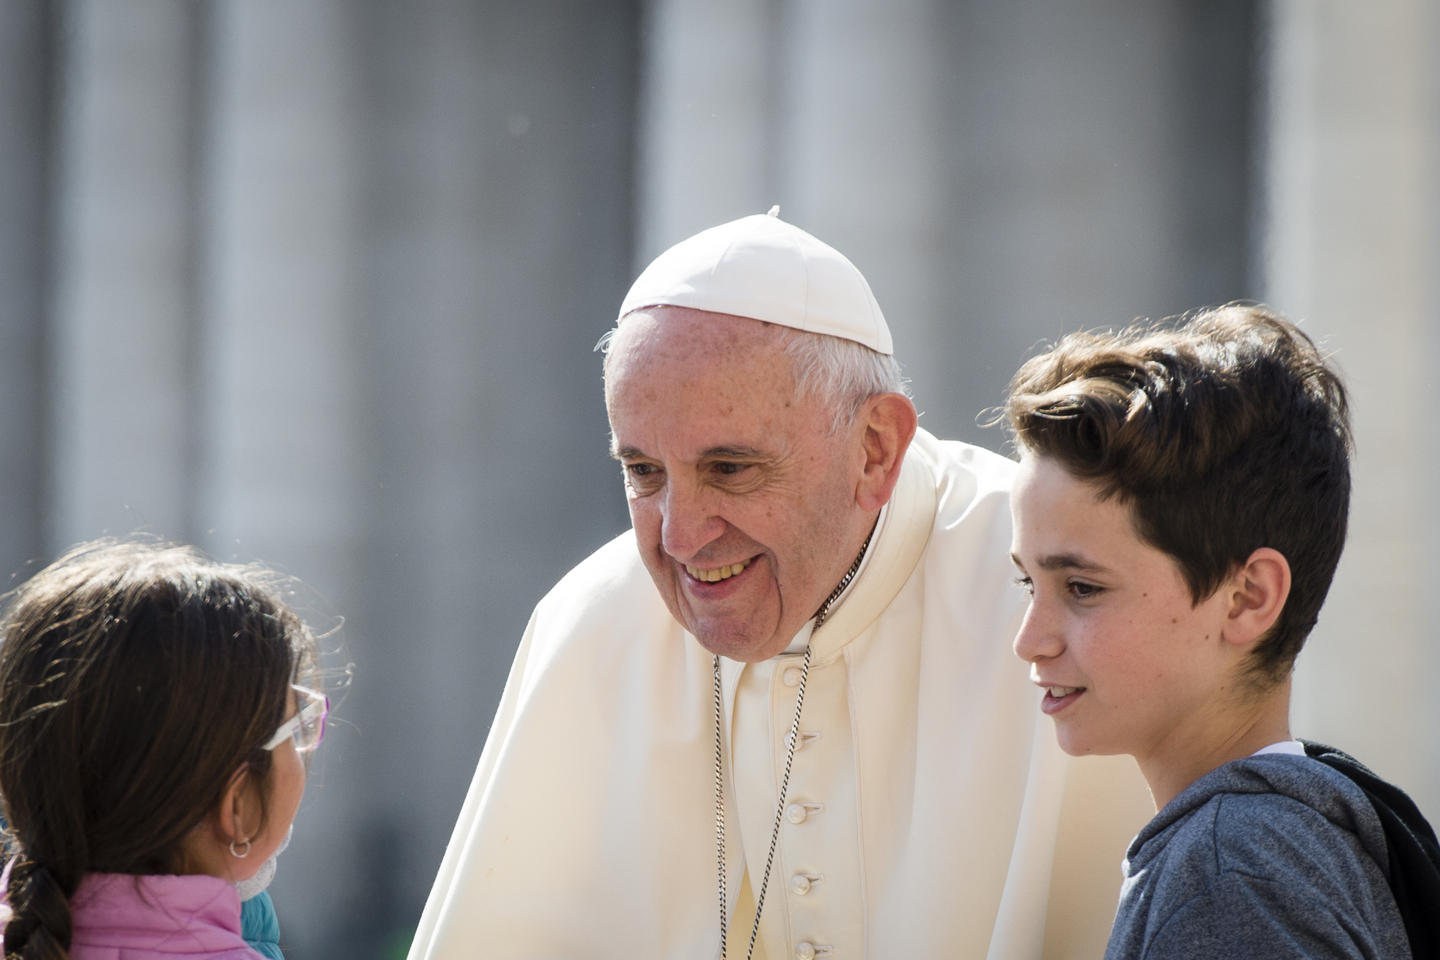 Pope Francis audience Jubilee Year of Mercy April 30, 2016